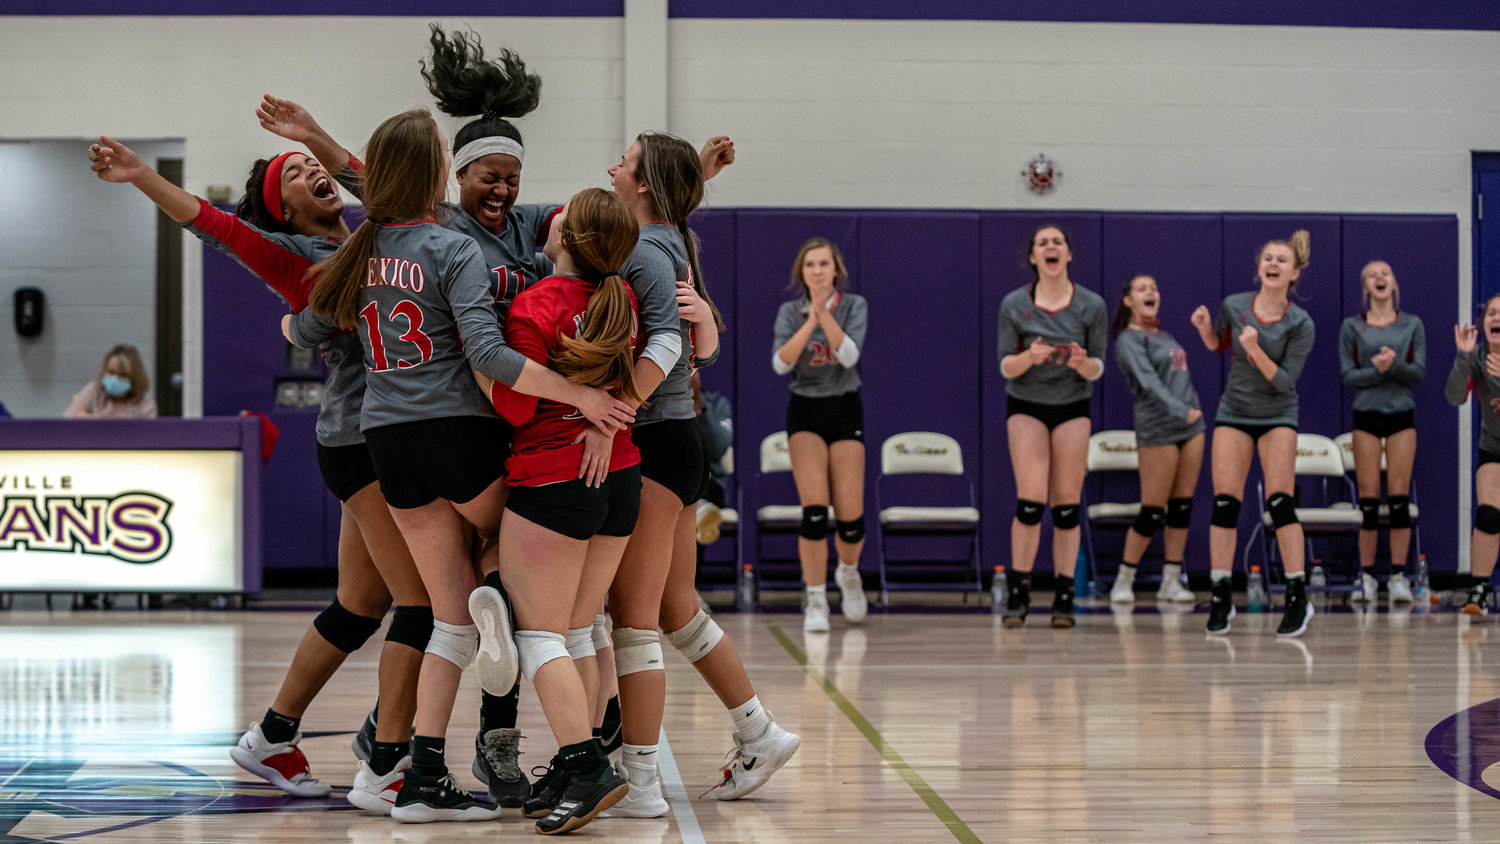 The Bulldogs celebrate a win in the first round of district play against Centralia in Hallsville last week. Addison McCoy, Jessica Stephens and Nayeli Ruiz were named to conference, district teams. (Eric Mattson)